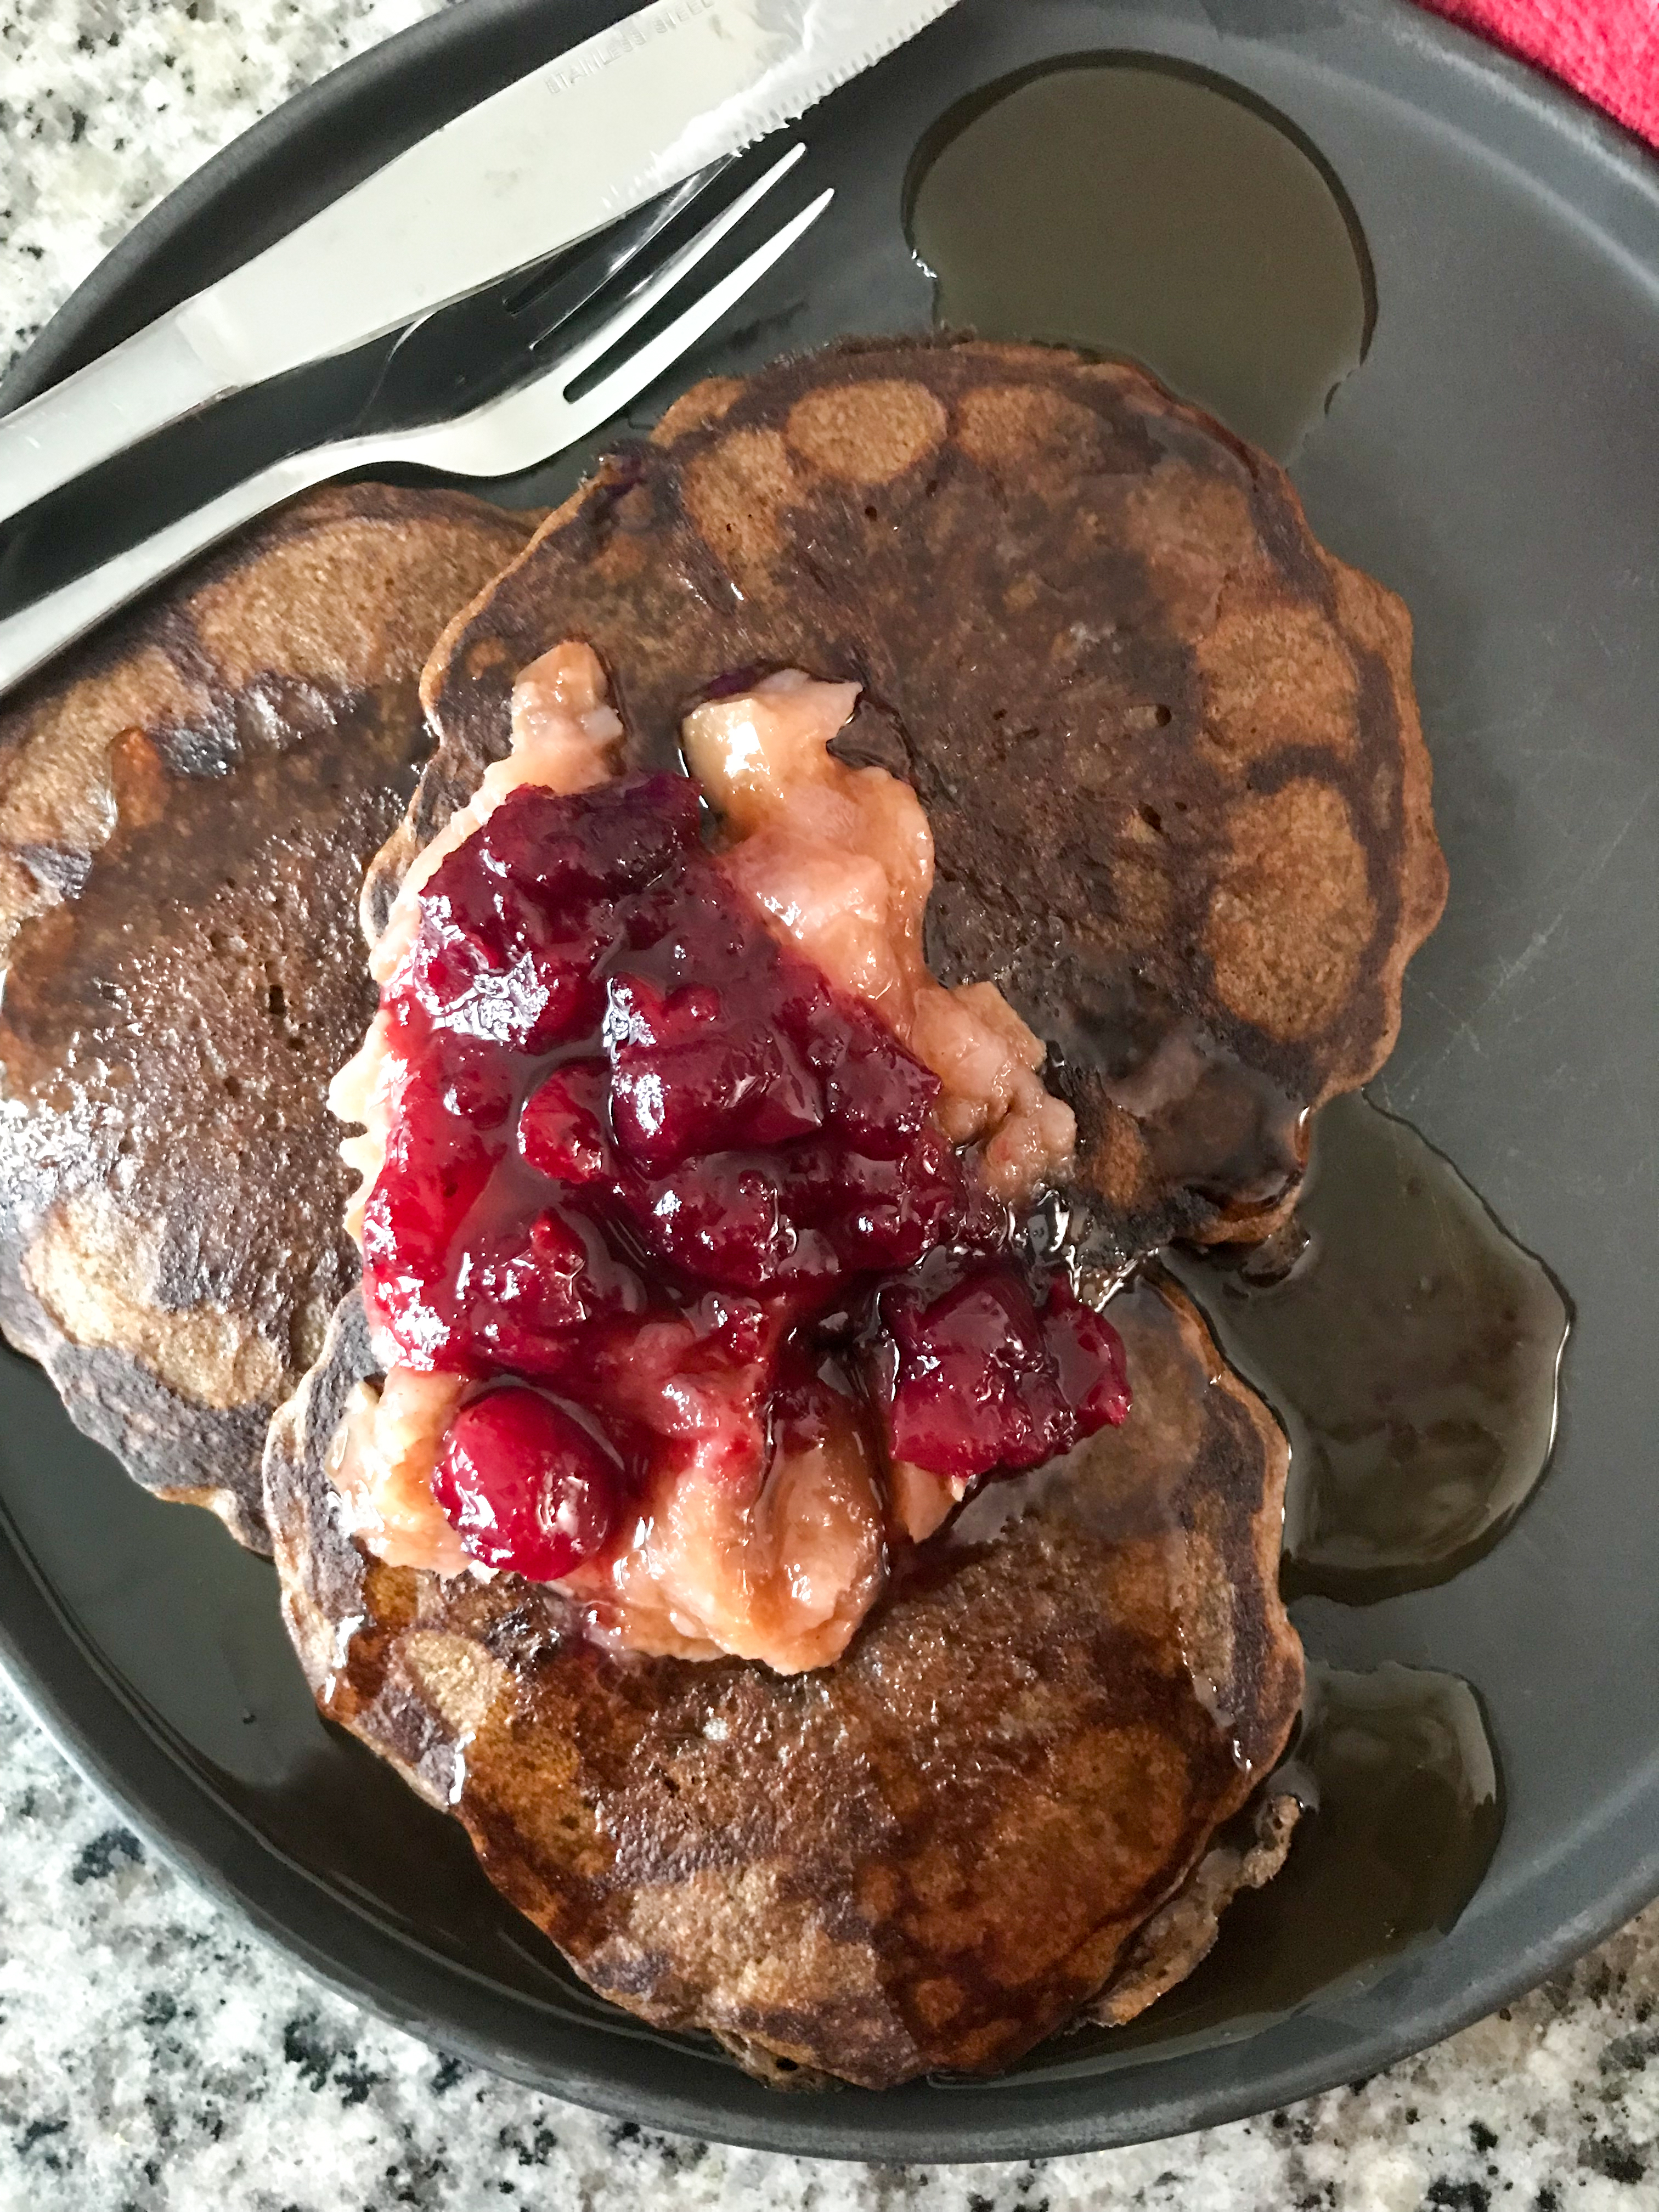 Overhead shot of gingerbread sourdough pancakes on a black plate. The pancakes are topped with applesauce, cranberry sauce, and maple syrup.